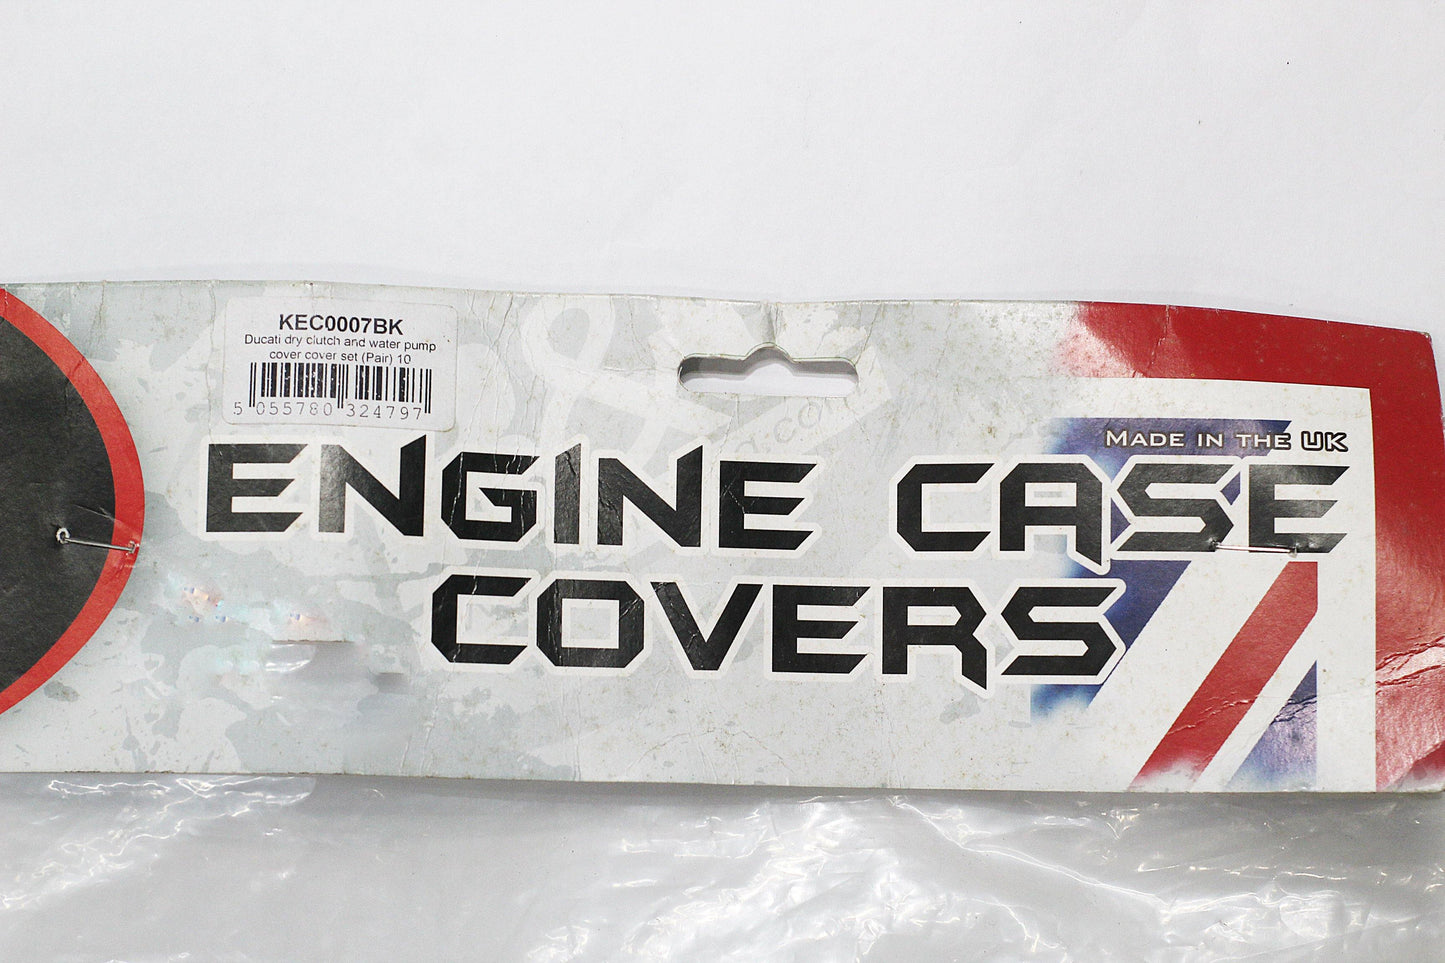 R&G Engine Case Cover Kit (2pcs) fits for Ducati 1098 & 1198 - Durian Bikers